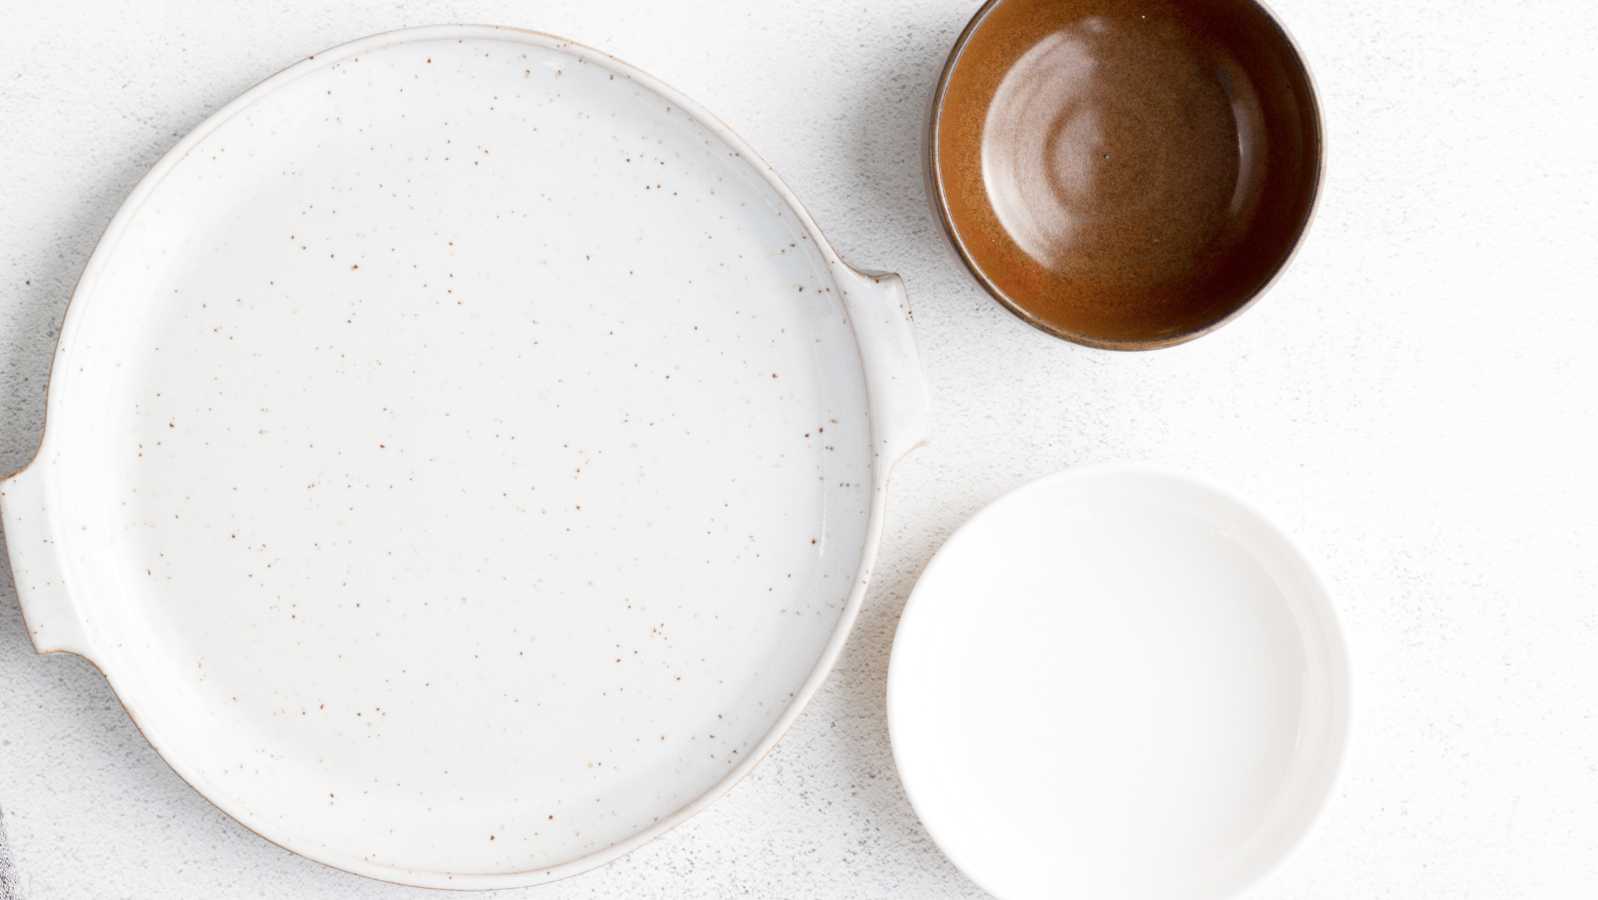 This is the Partnerships background image. On the right-hand side is one large white with small brown splatters, and on the top left is a small brown bowl and directly below is a white bowl. 